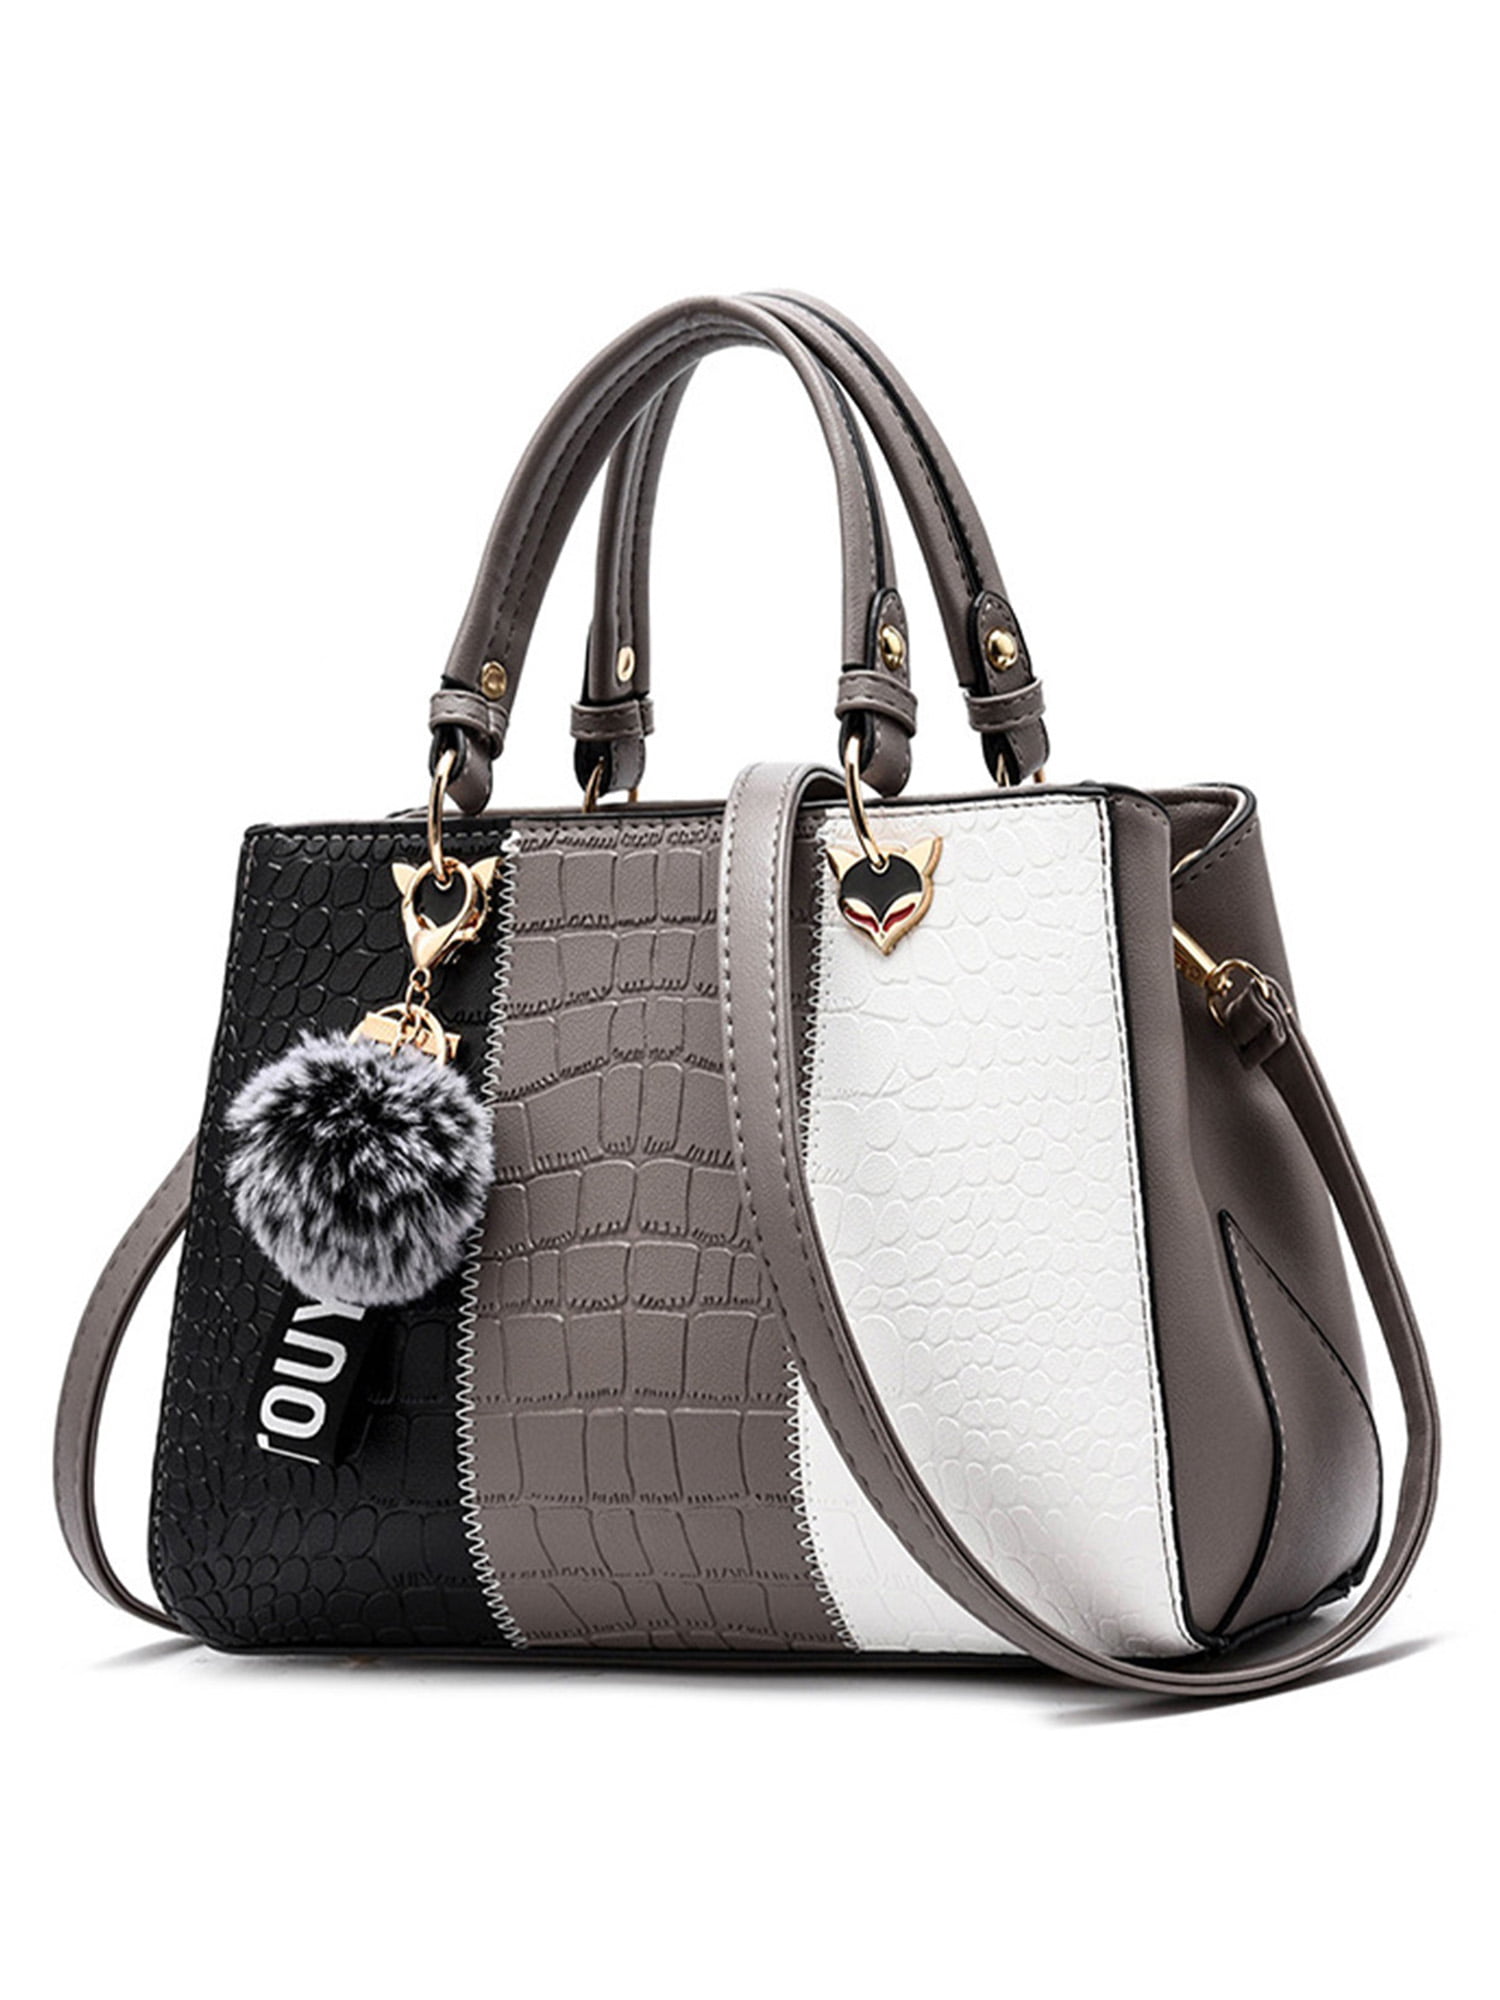 Avamo Women PU Leather Quilted Shoulder Bag with Chain Strap, Small Purse  Crossbody Bag Handbag